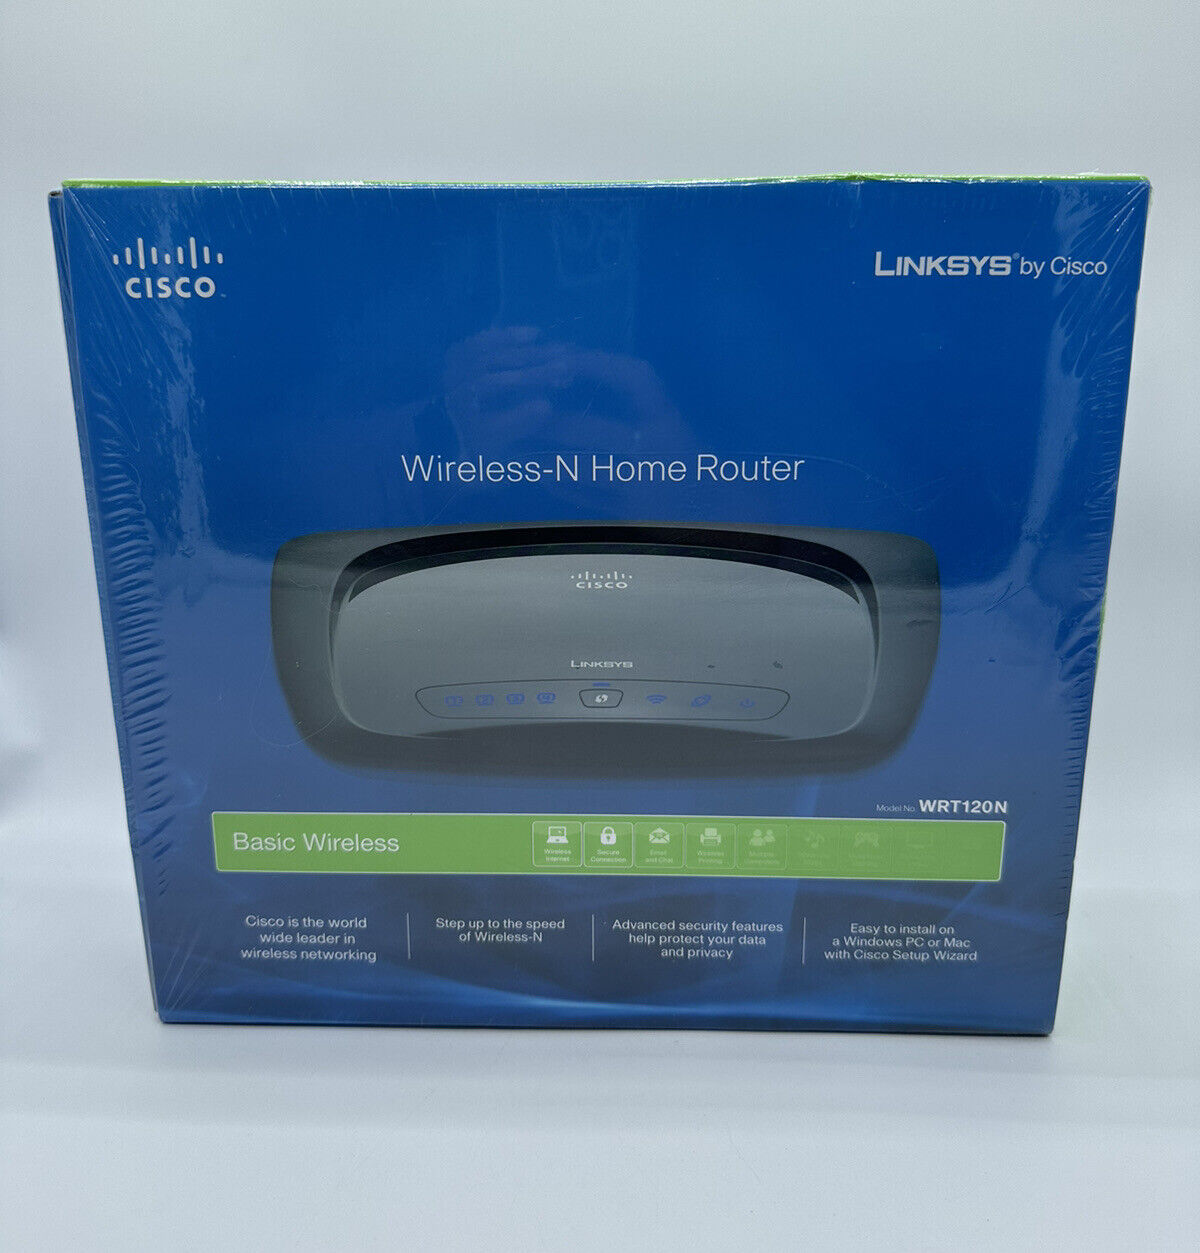 Linksys by Cisco Wireless-N Home Router Model WRT120N 4-Port 10/100 Ethernet NEW